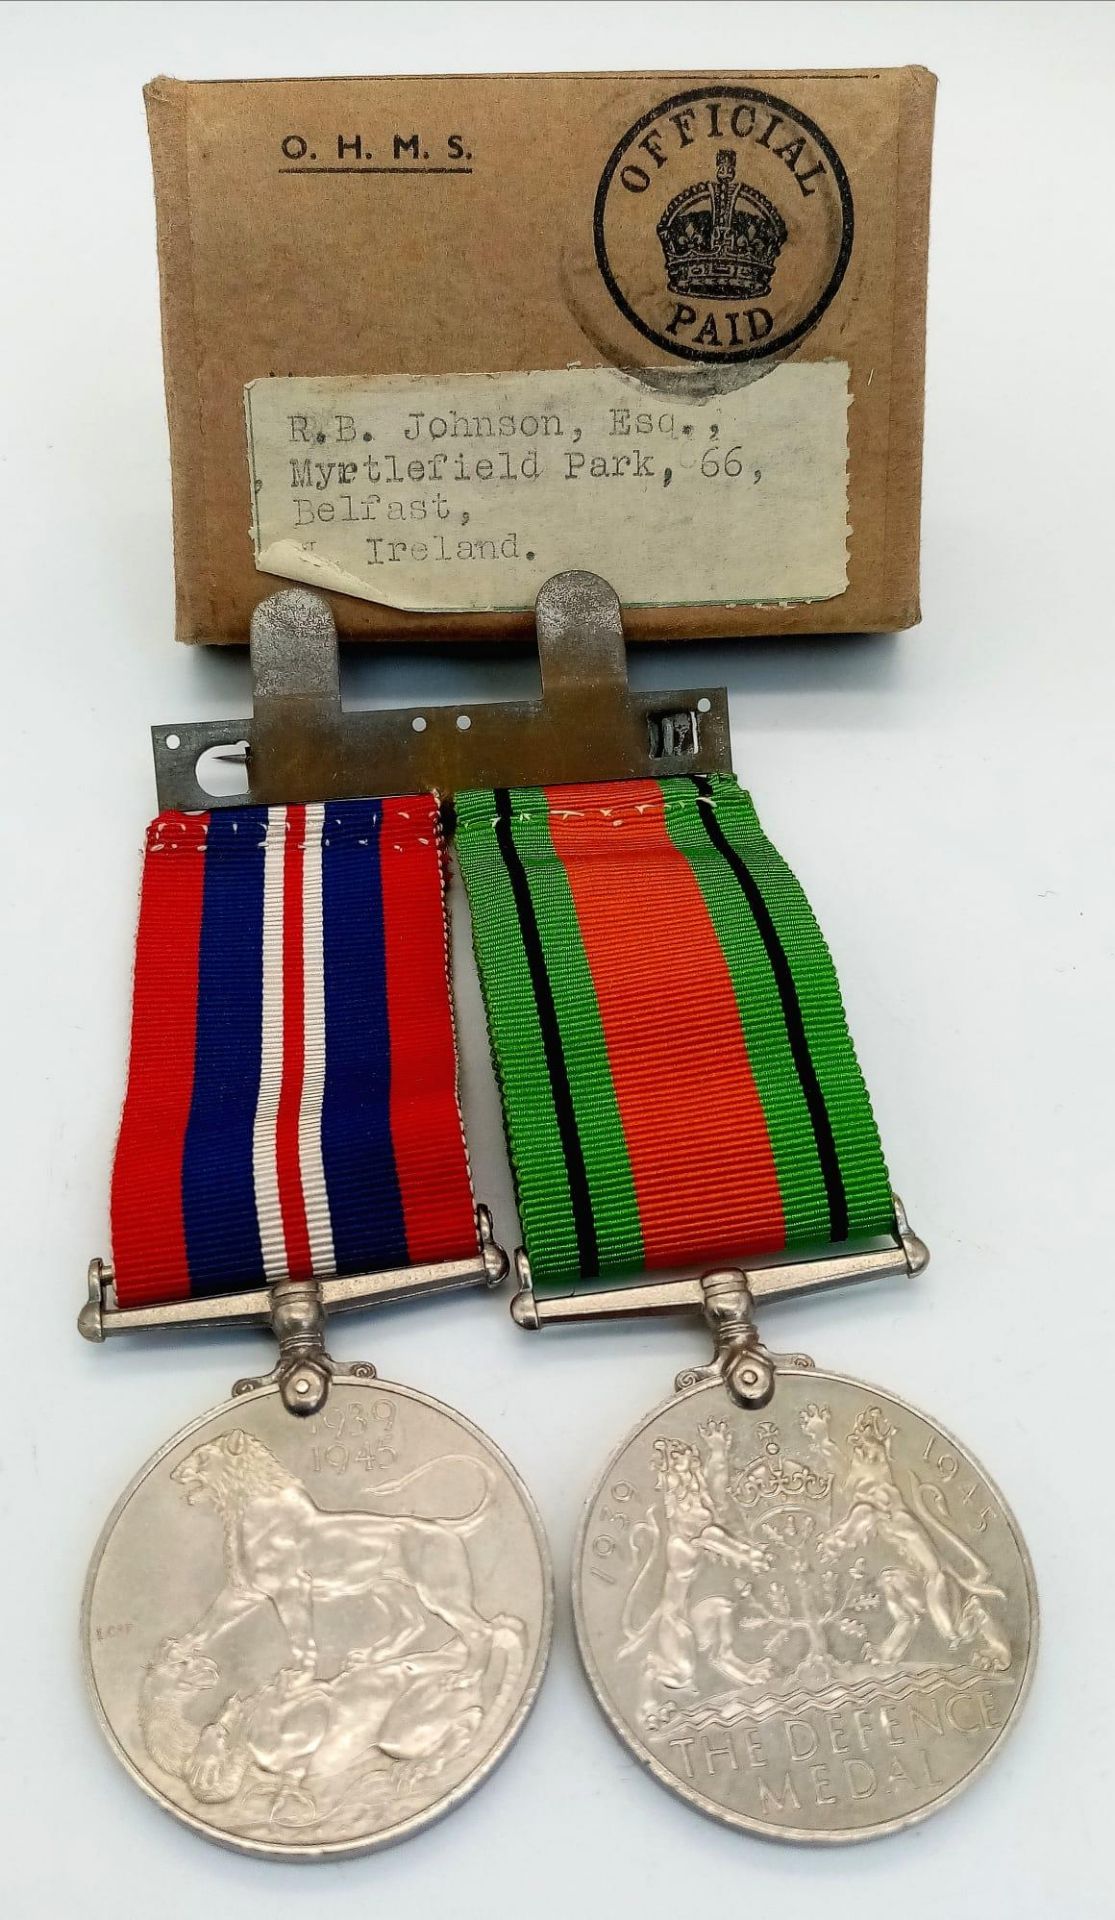 Two British WW2 George VI Medals - The Defence Medal and The War Medal, both with ribbons and a